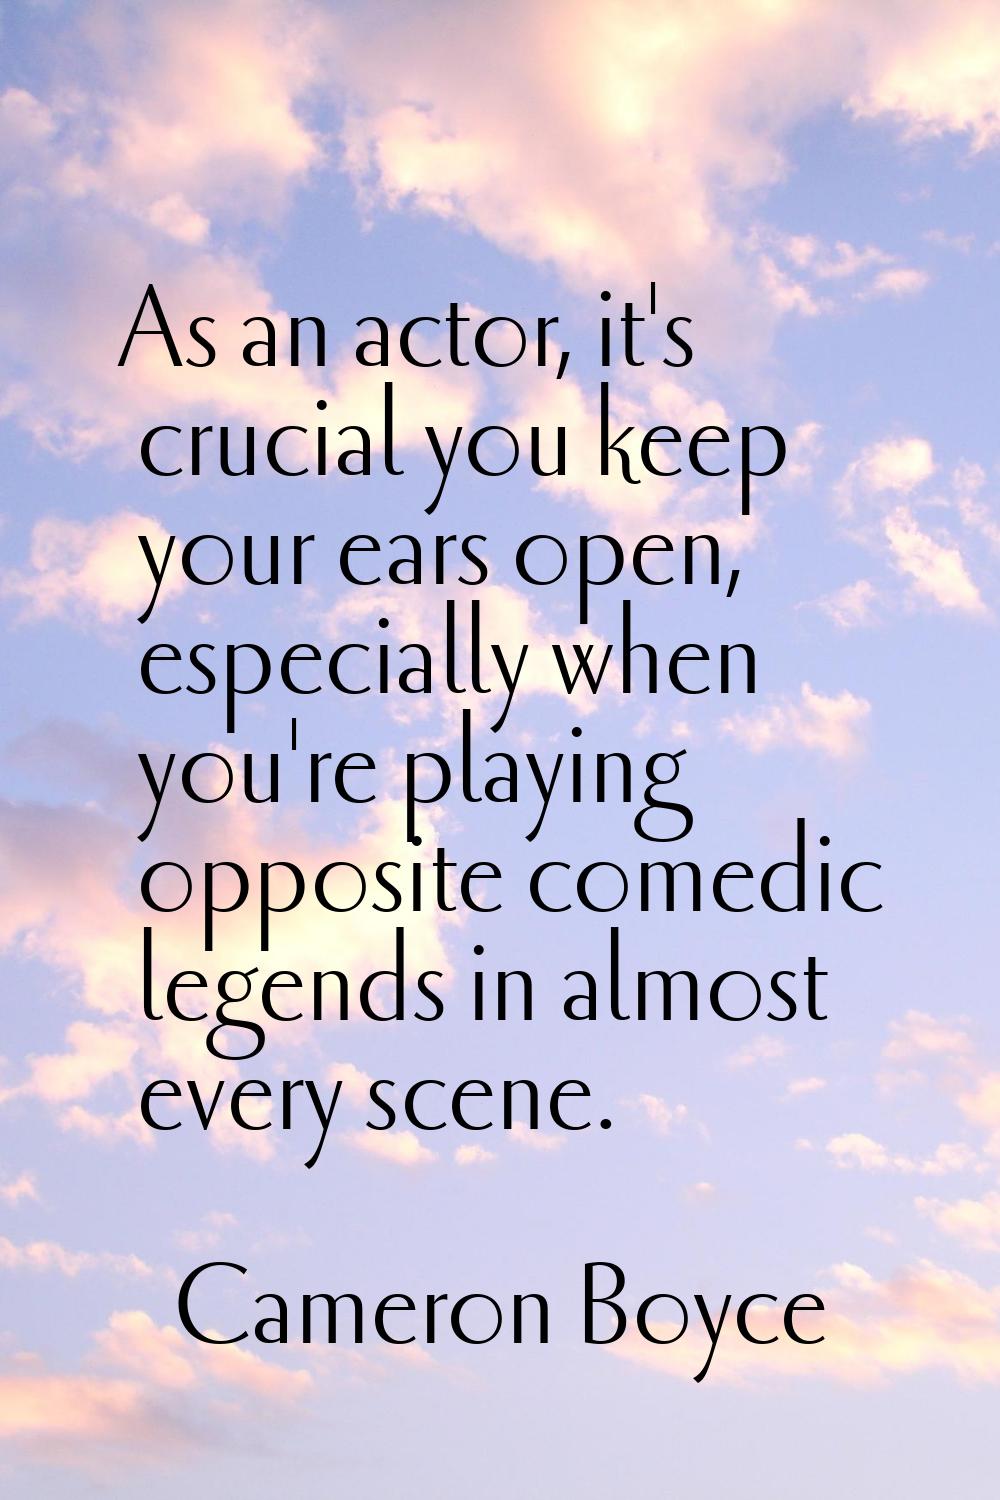 As an actor, it's crucial you keep your ears open, especially when you're playing opposite comedic 